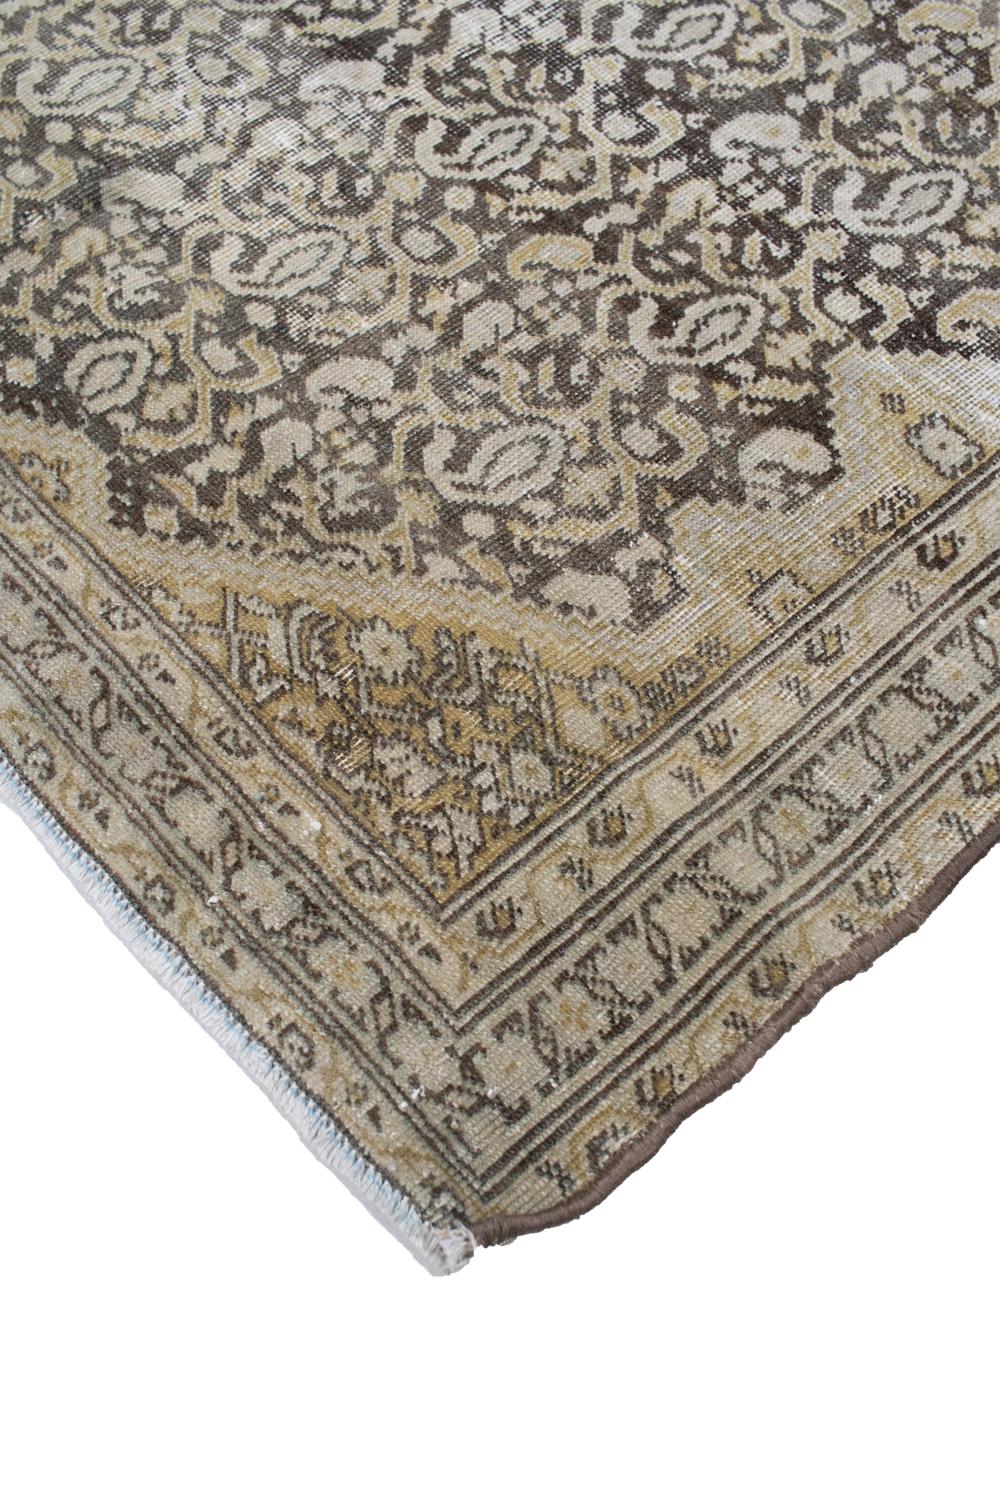 Antique Persian Malayer Yastik Rug In Good Condition For Sale In West Palm Beach, FL